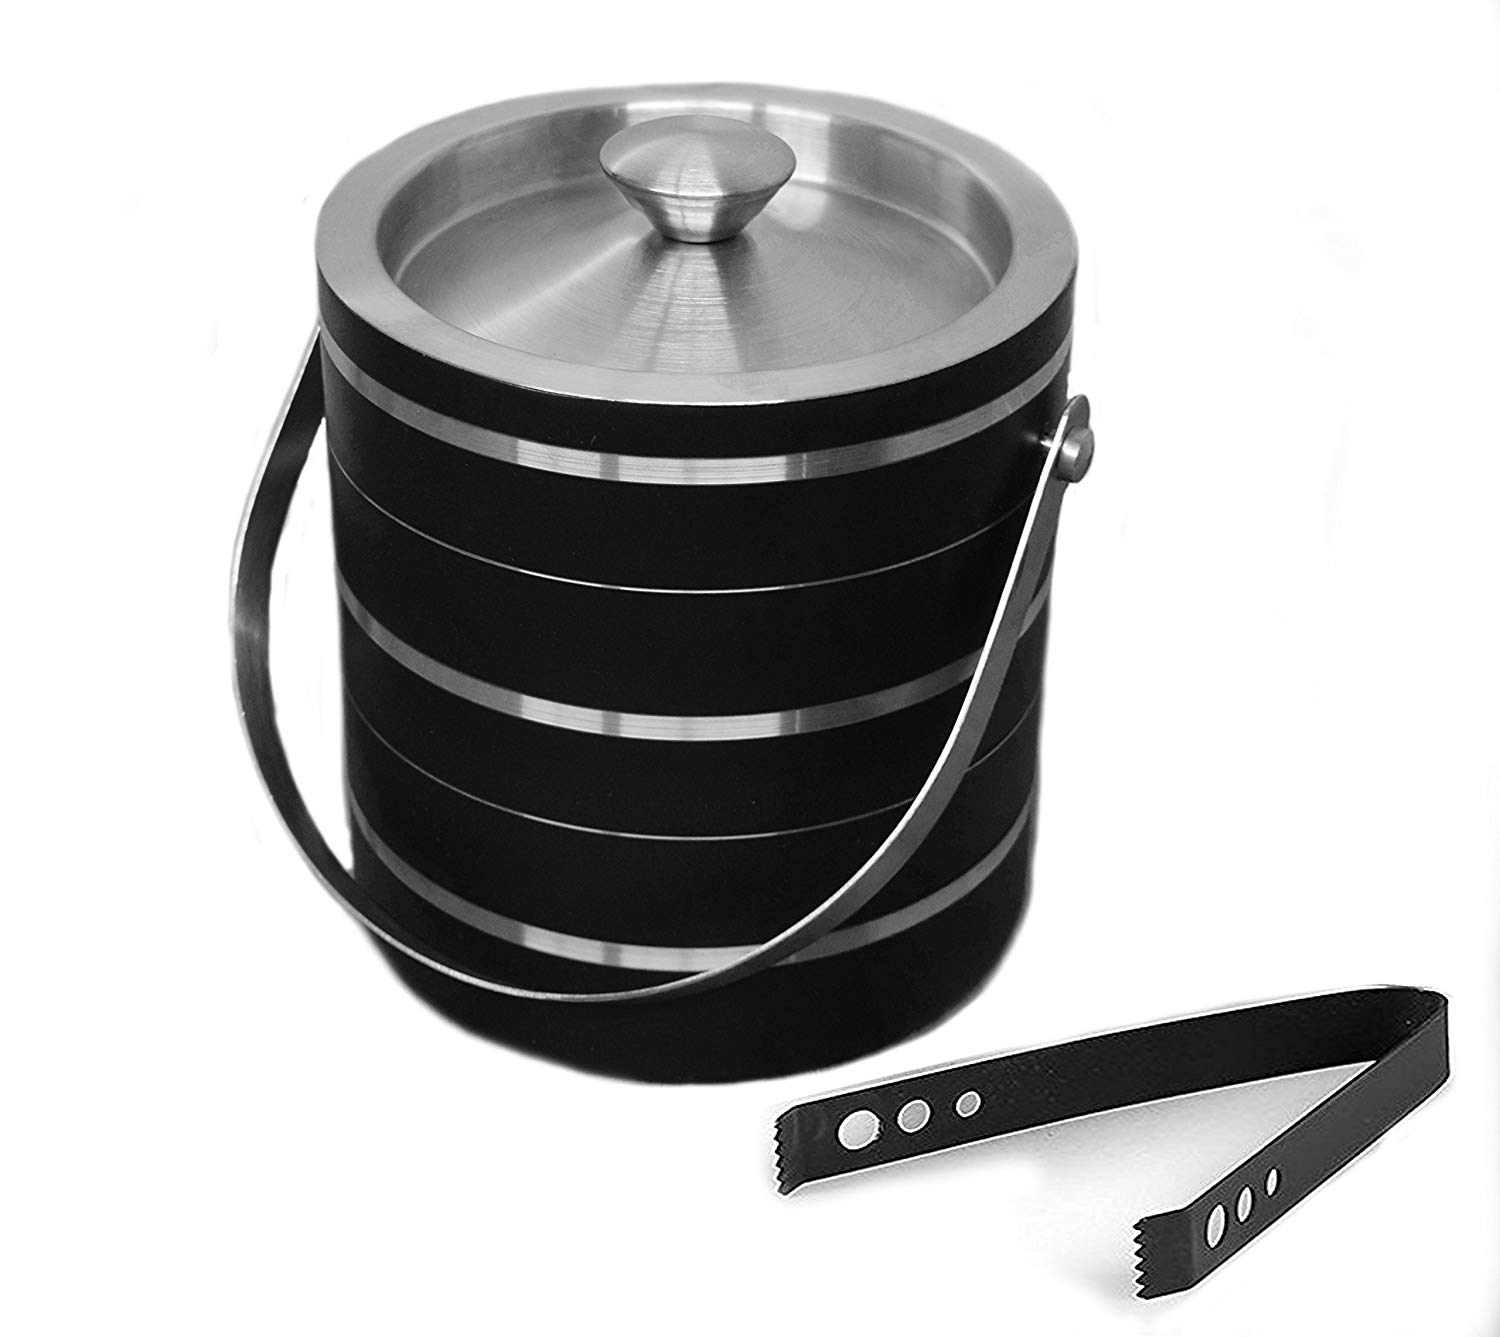 Stainless Steel Ice Bucket with Tongs - Black Chrome Finish - Abrazo